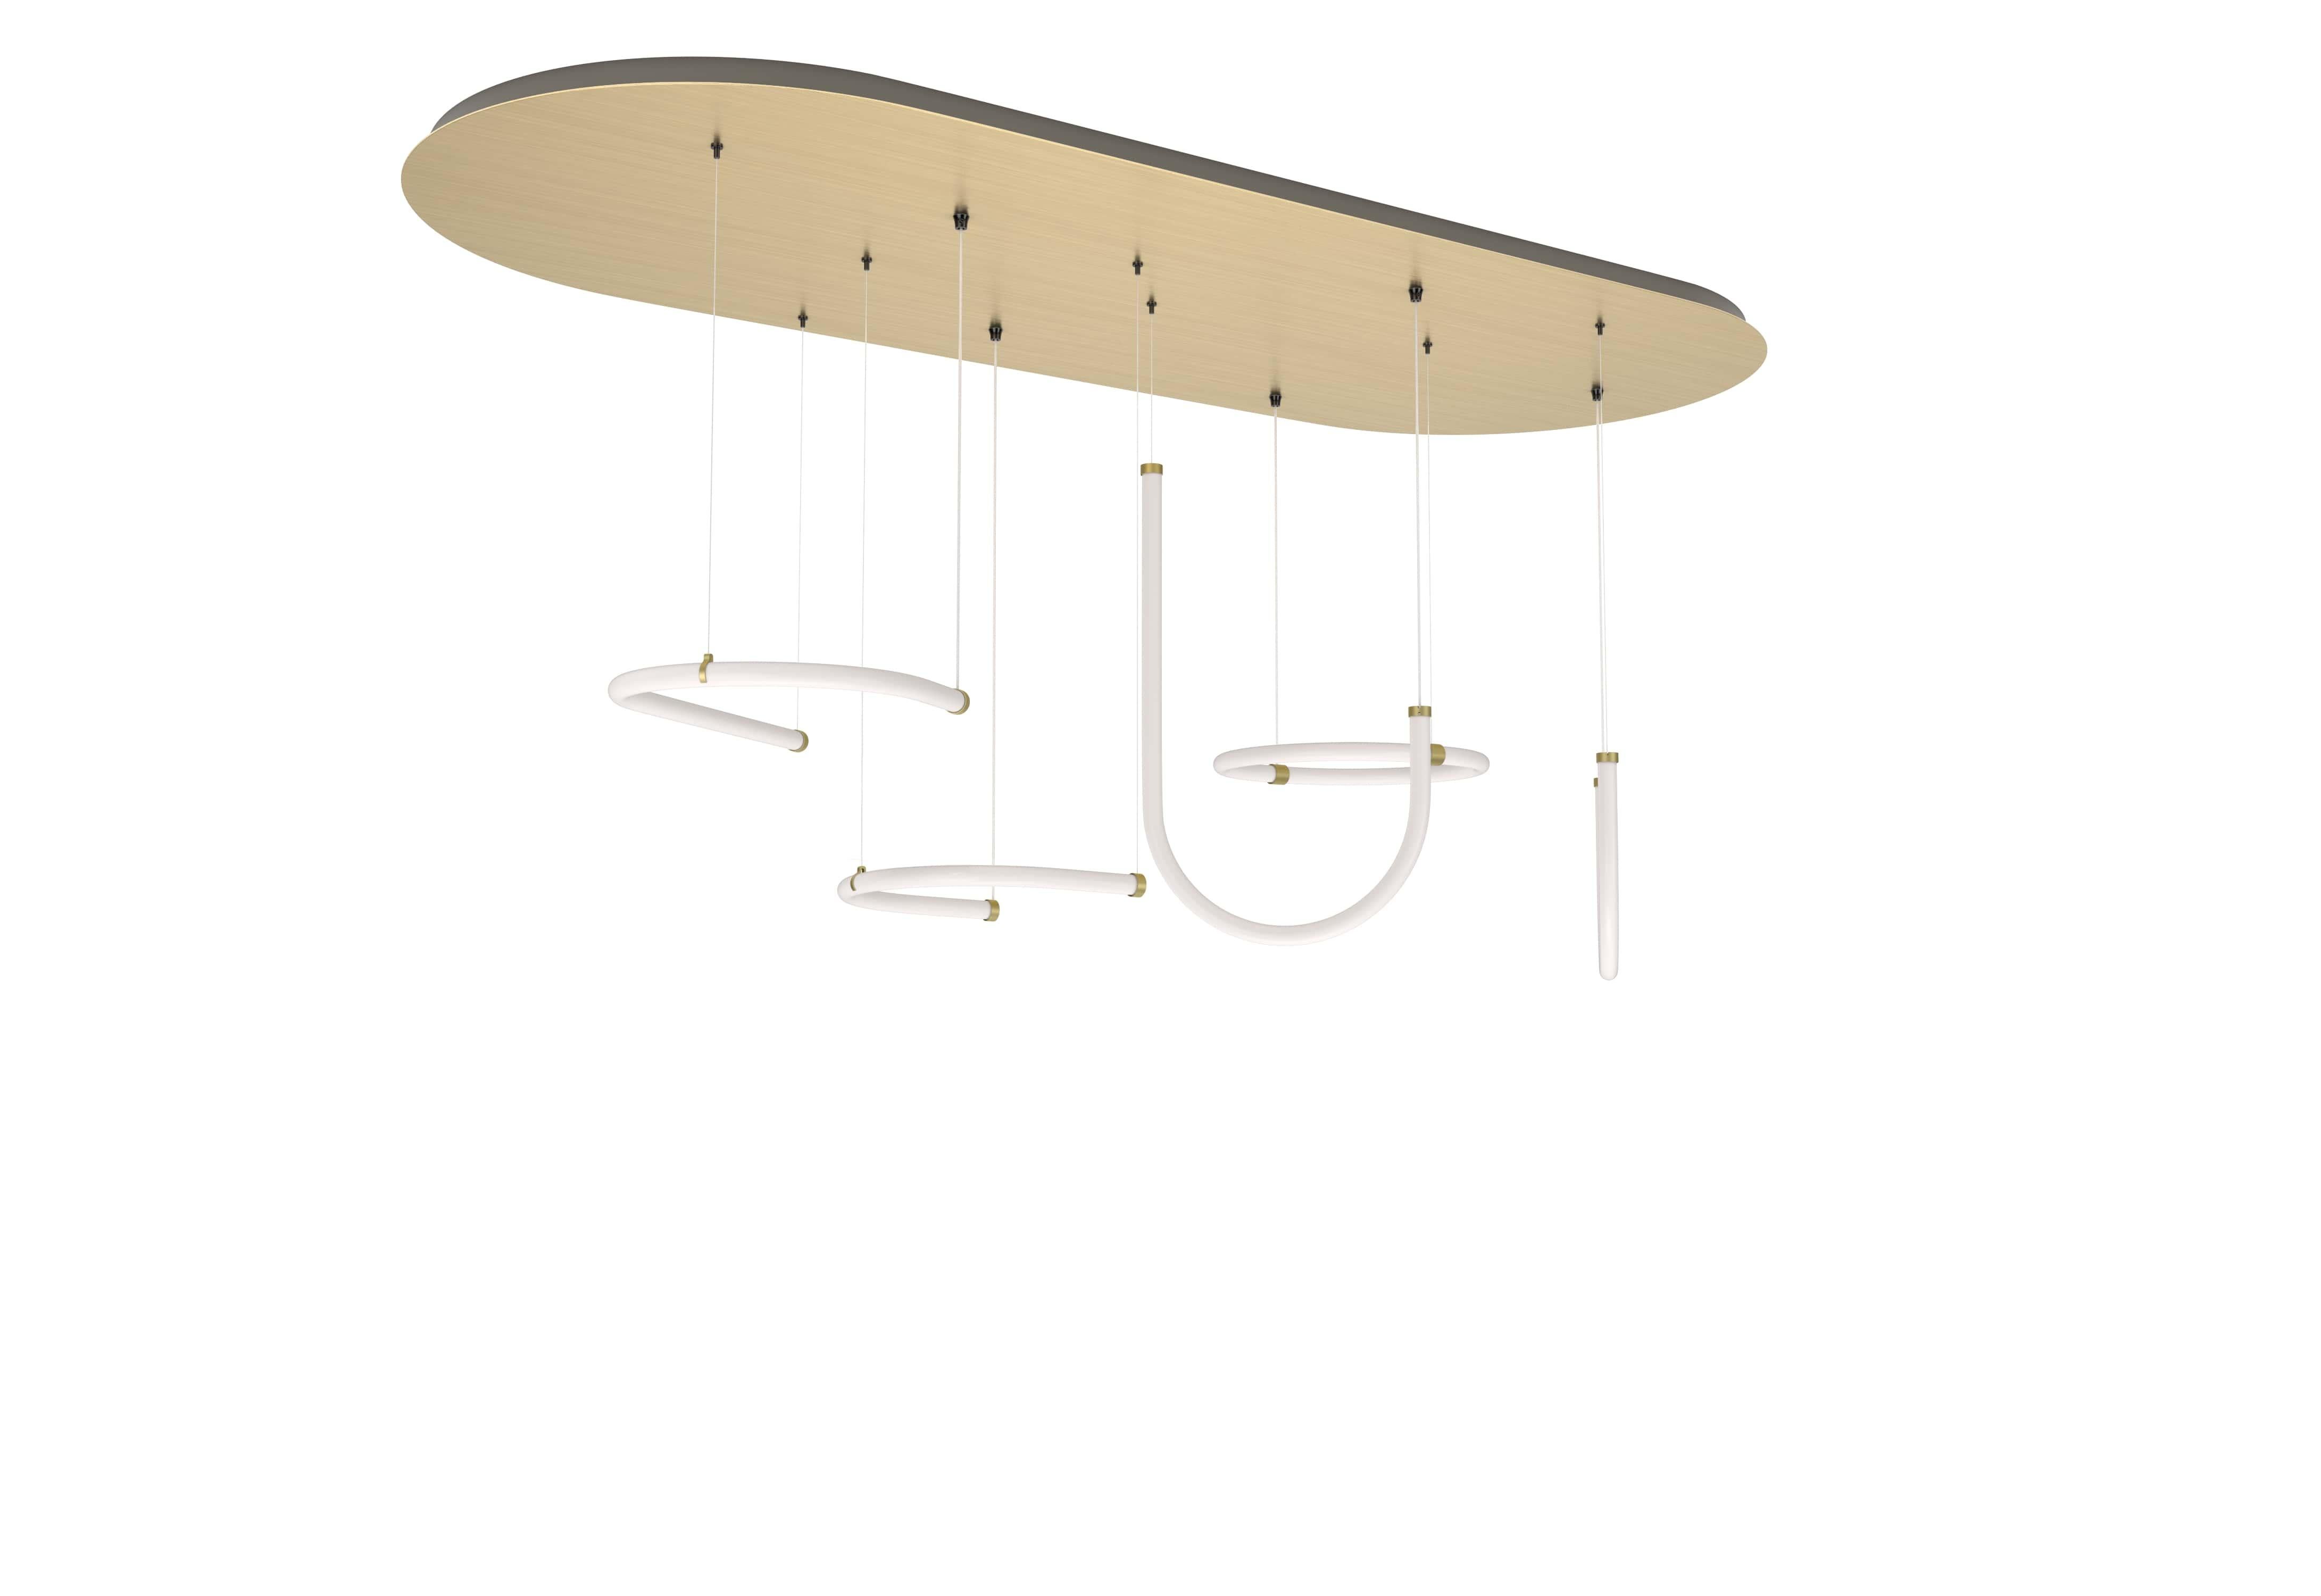 Petite Friture Unseen Quintuple Pendant Light System in Brass Transluscent with Curved LED-lights by Studio Pepe, 2020

Unseen is a set of modular curved LED-light tubes that seemingly float in space. The collection is a sleek lighting ensemble,